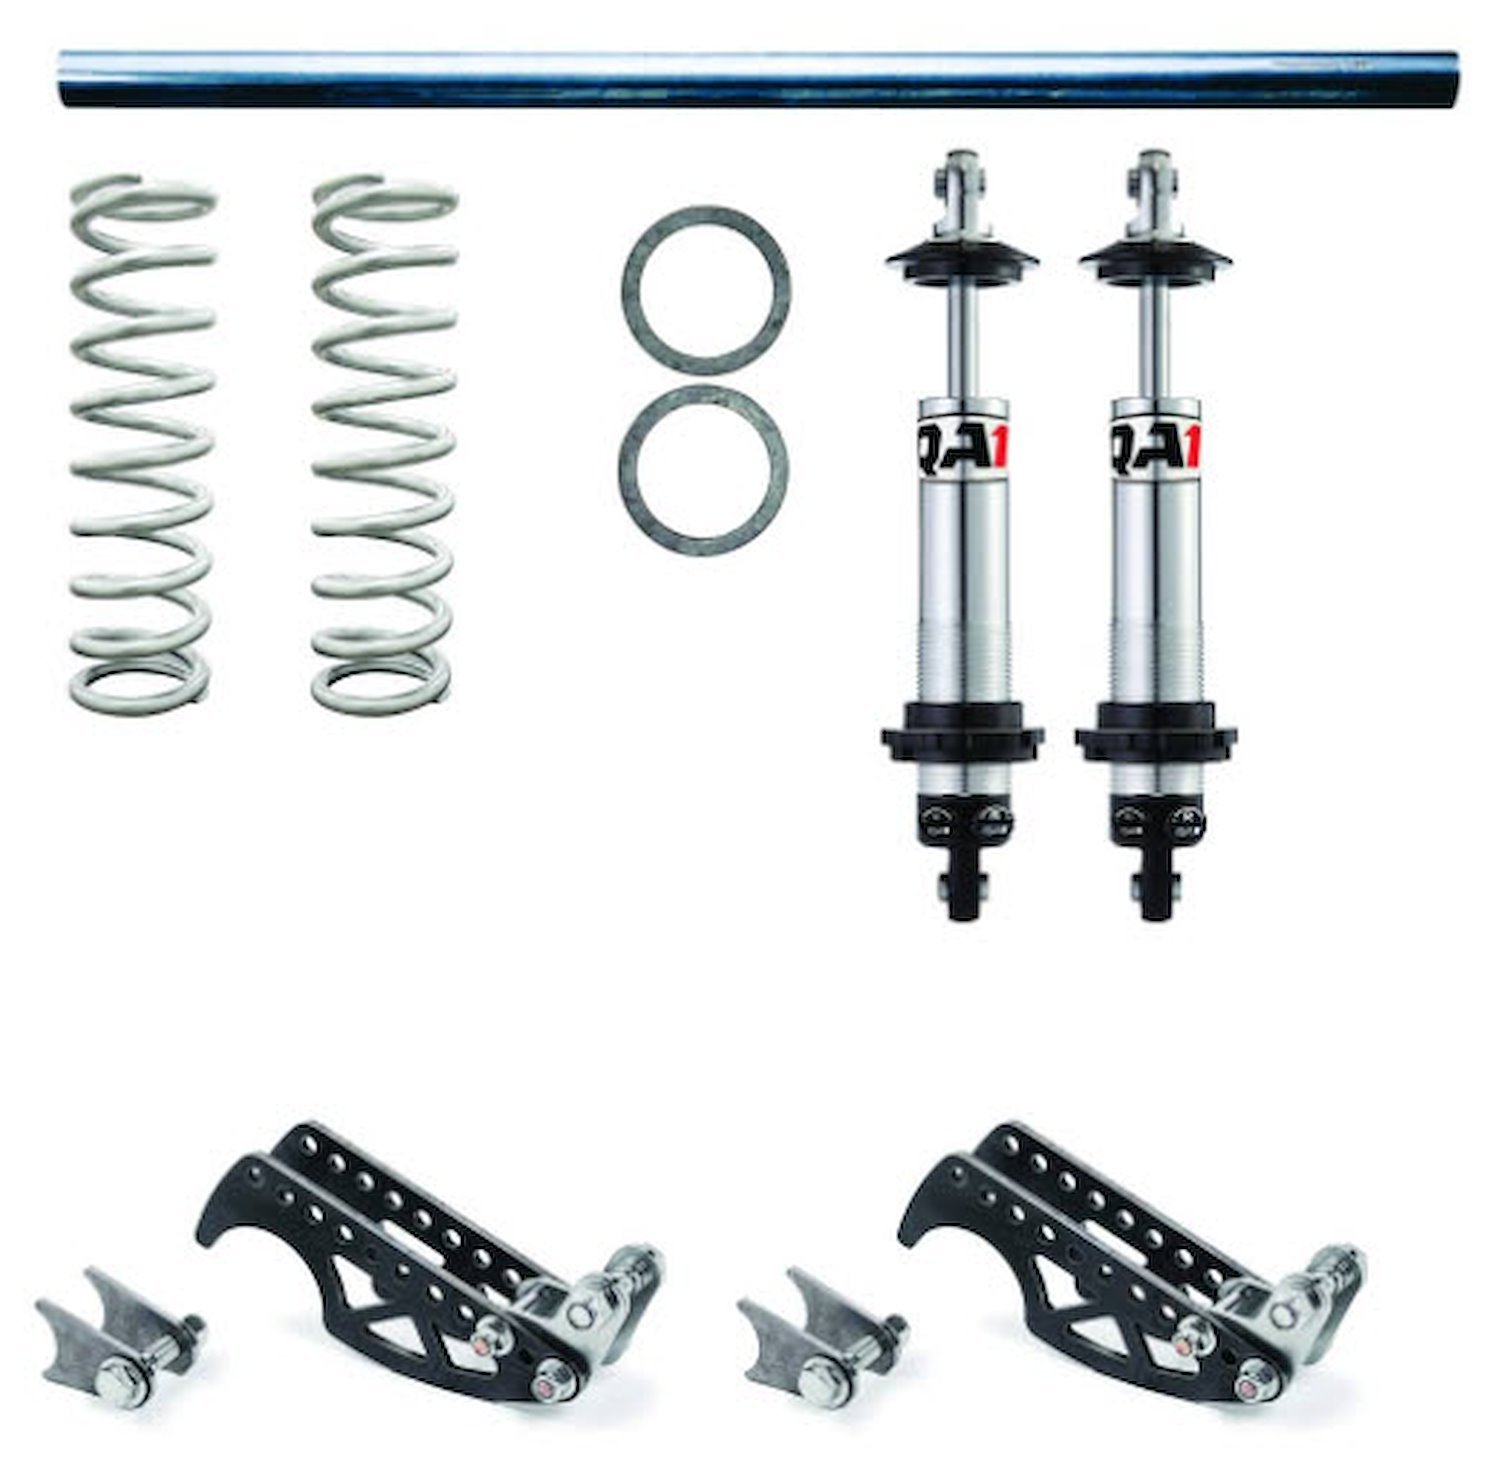 DD501-12250 Heavy-Duty Pro Rear Coil-Over Conversion System for 3 in. Axle Tubes w/Double-Adjustable Shocks & 250 lb. Springs